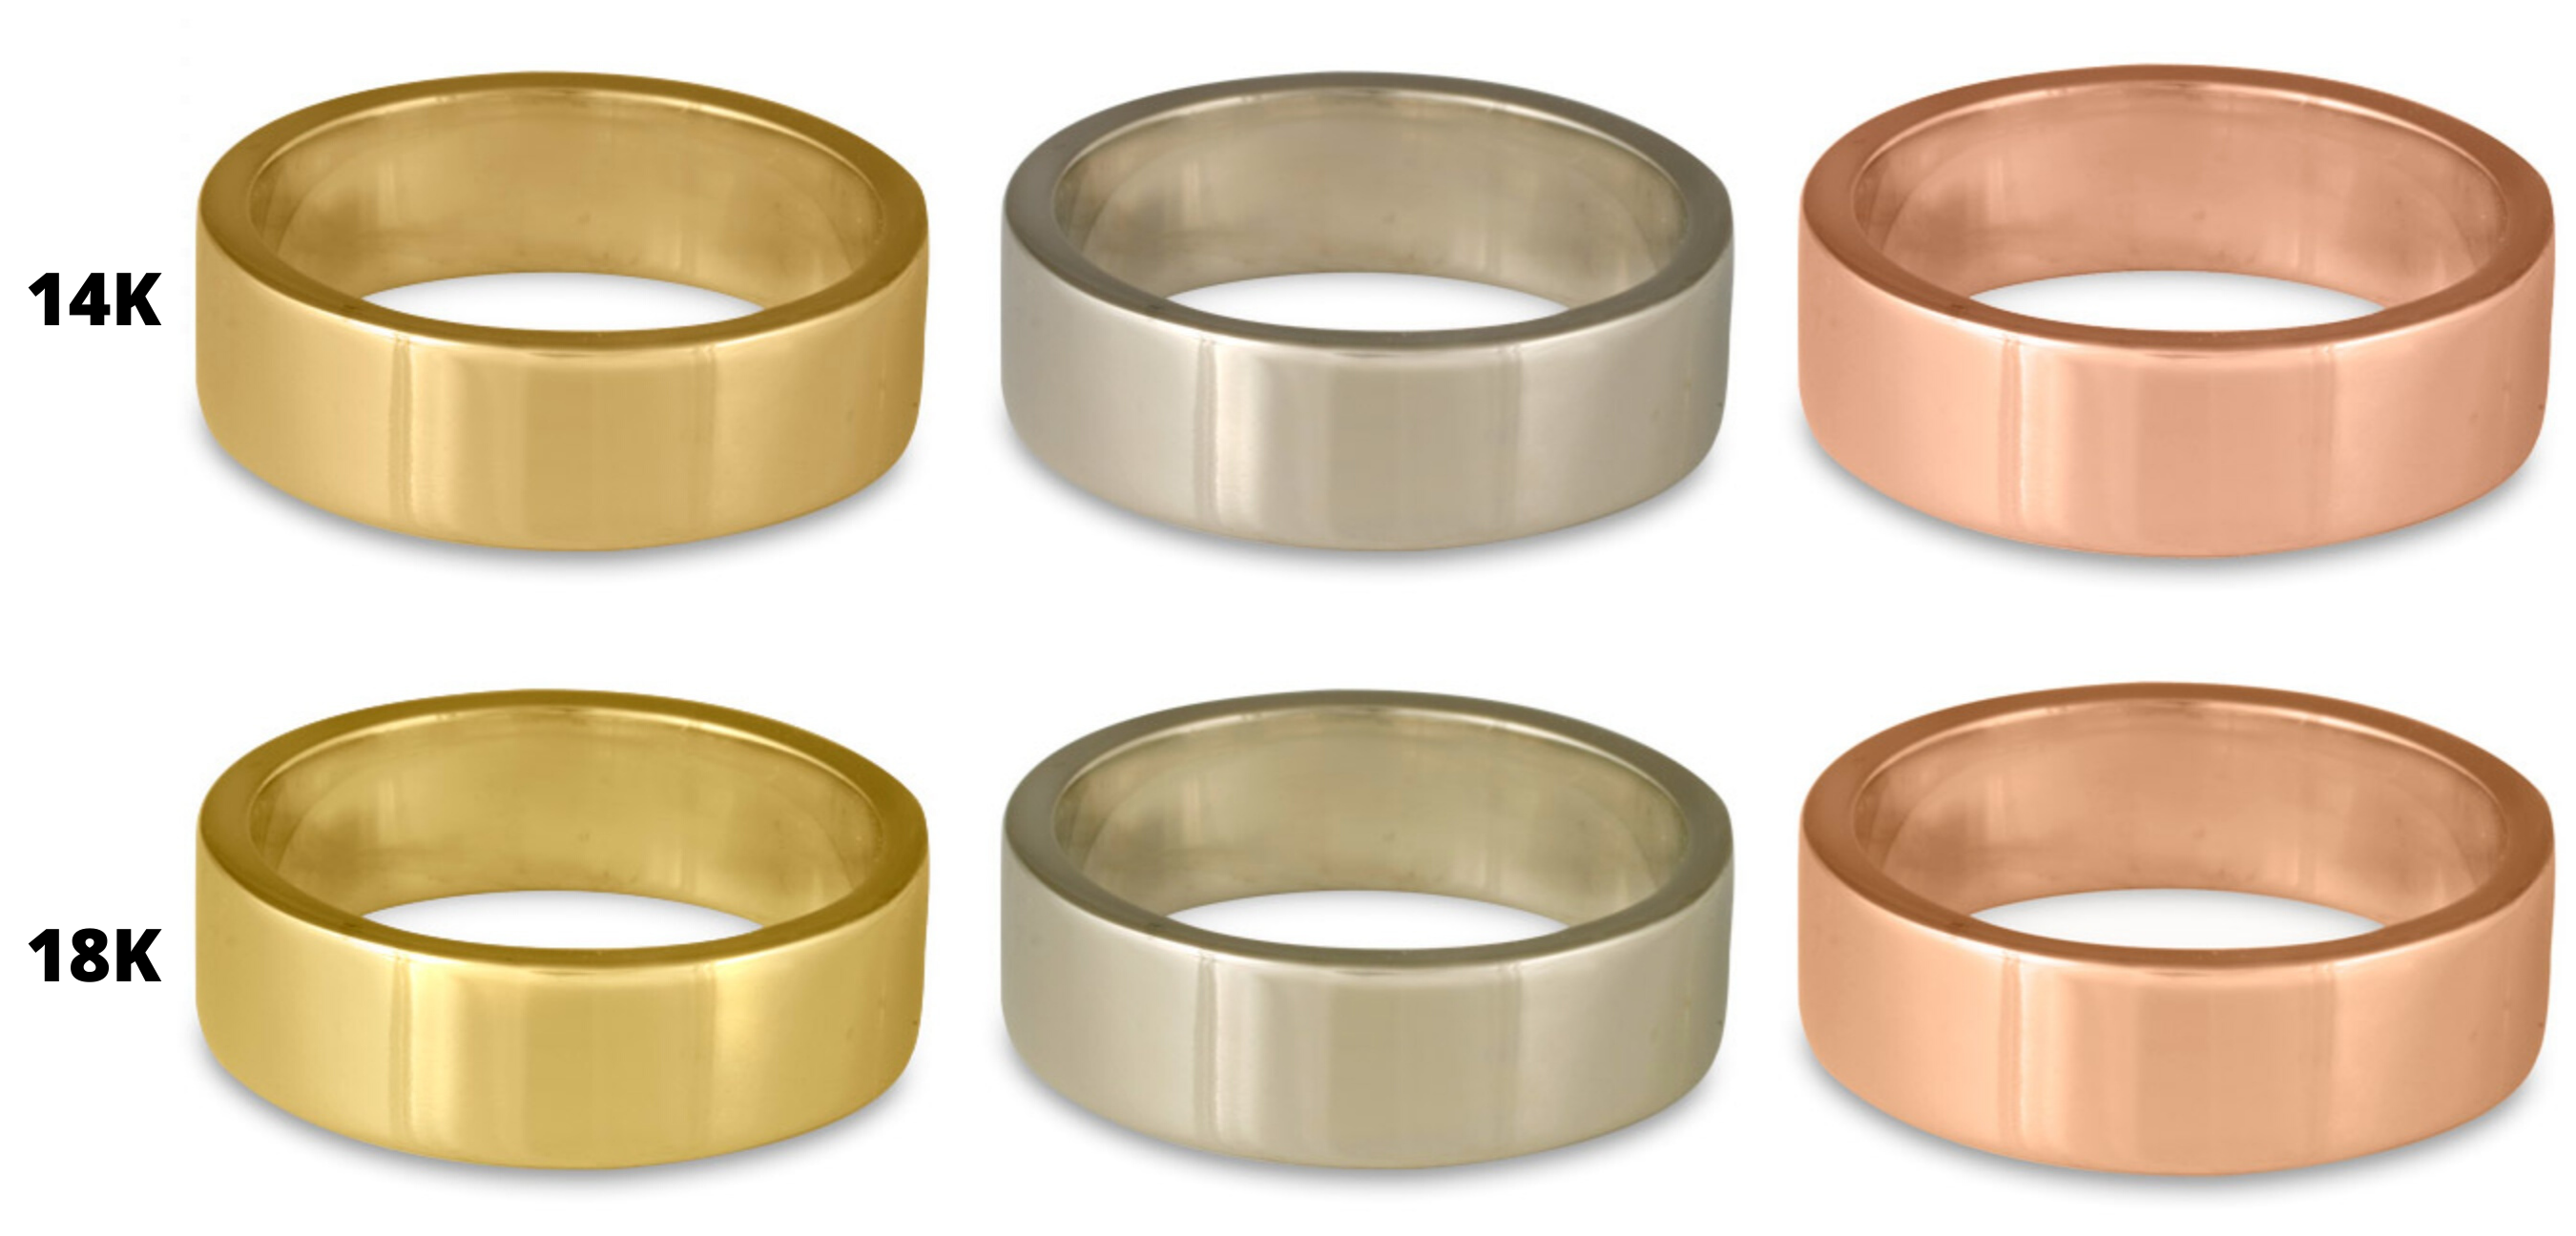 7mm wide men's comfort fit wedding bands shown here in 14K and 18K yellow, white, and rose gold.